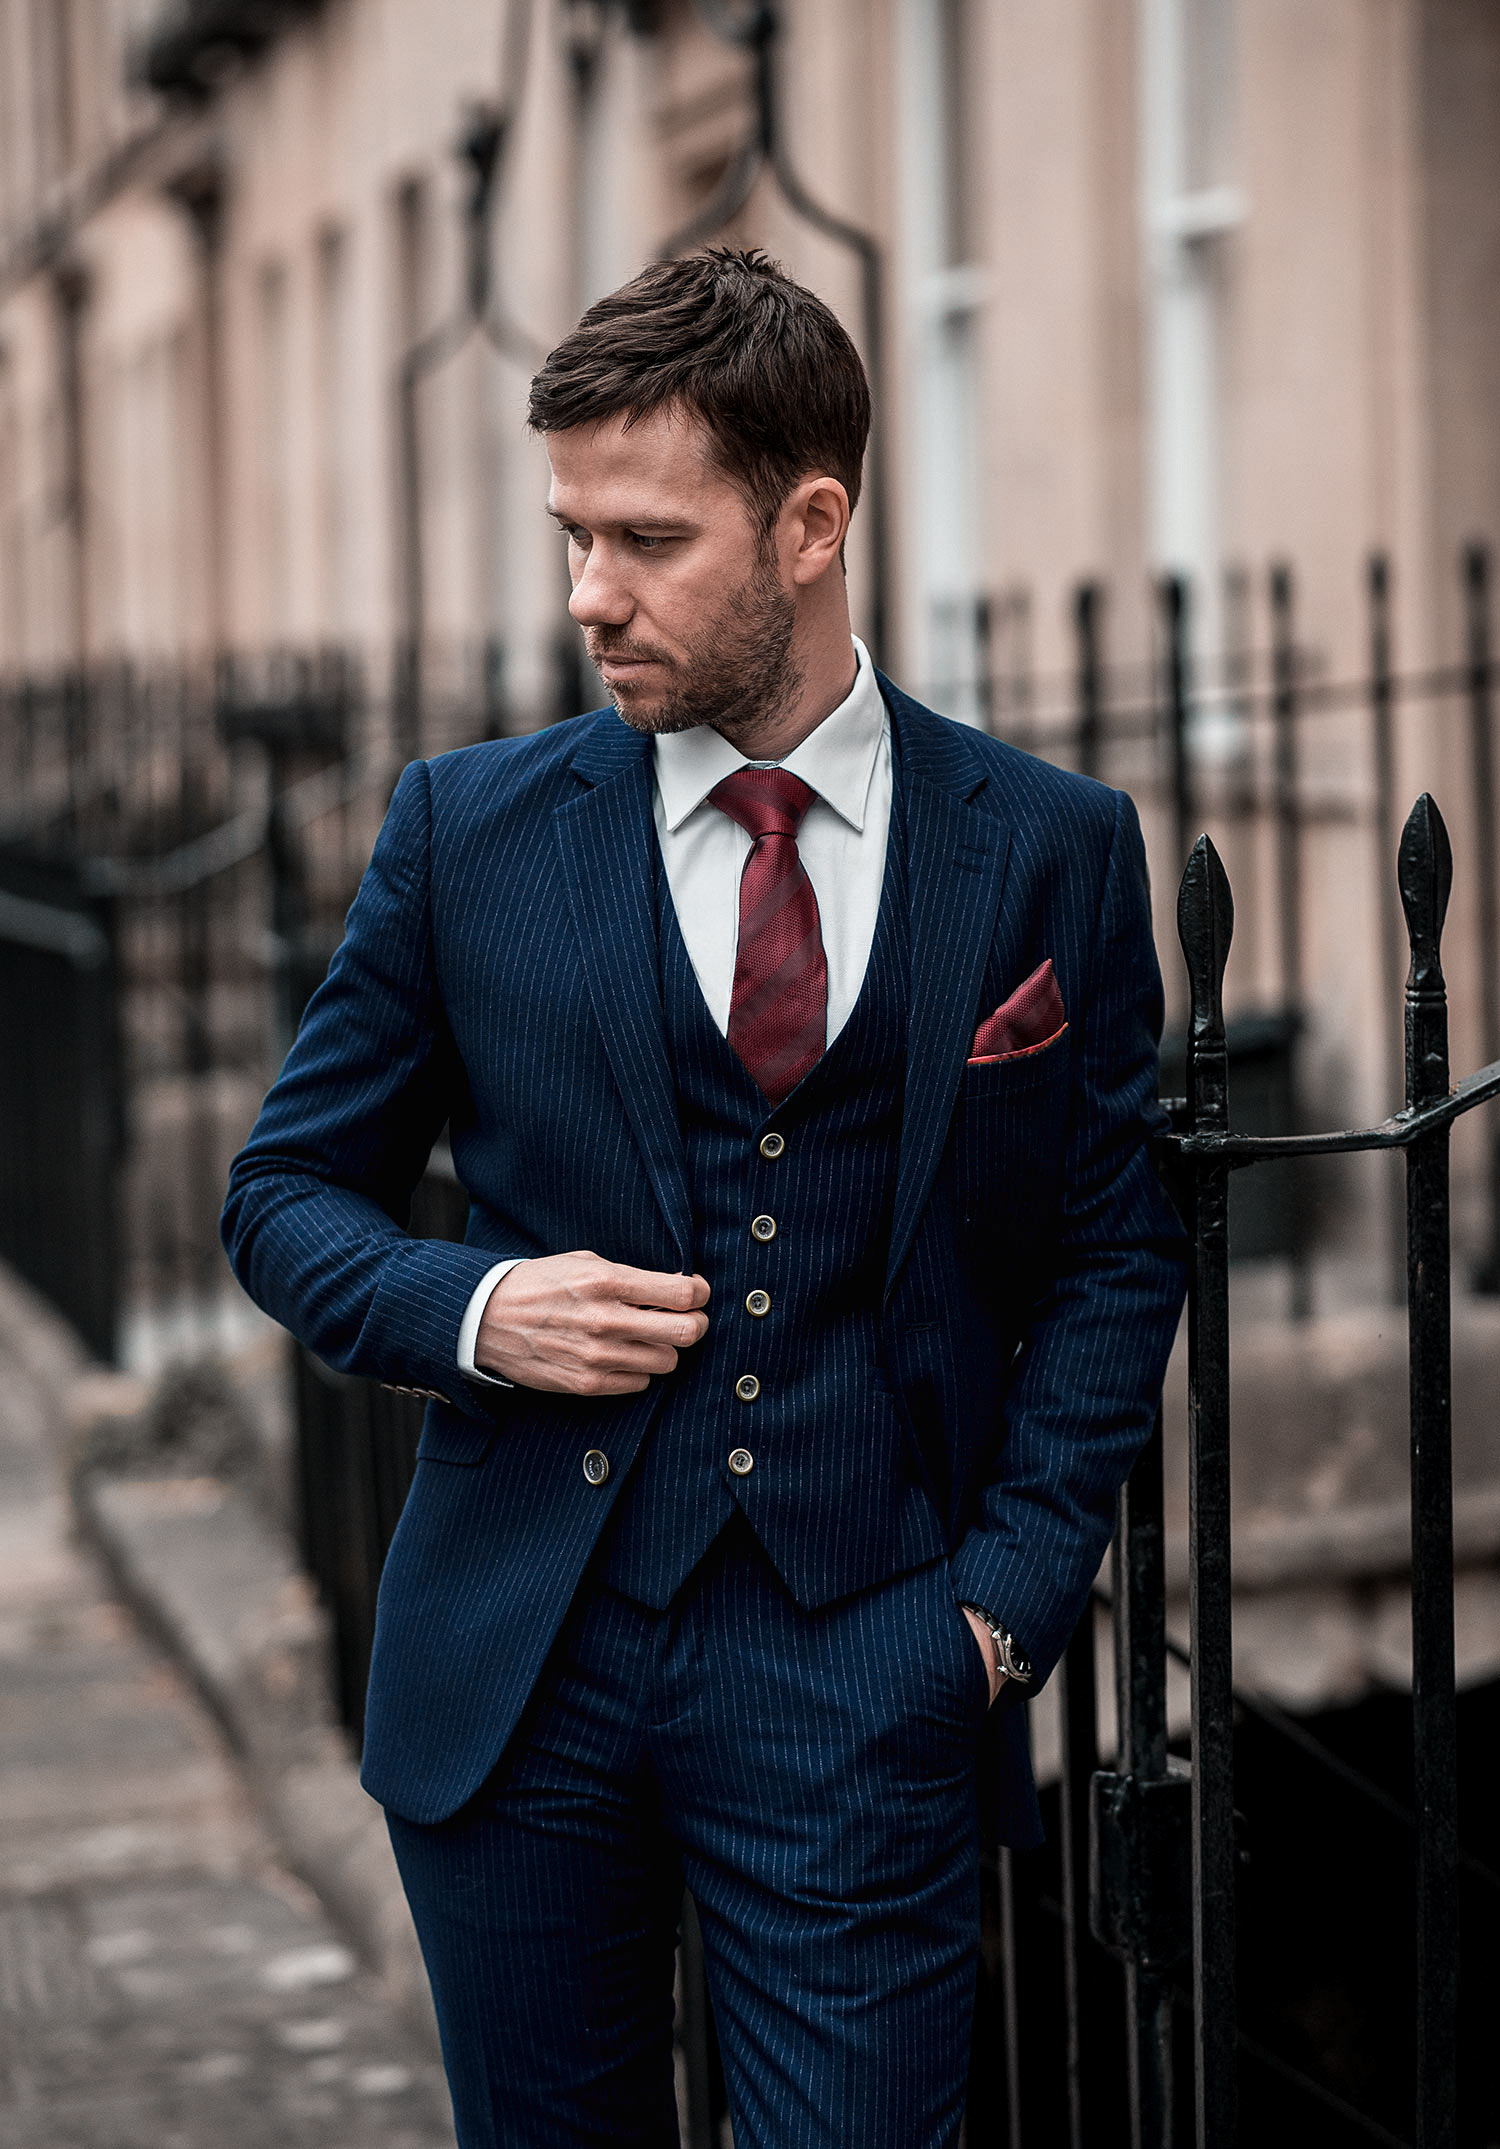 Men’s Skinny Fit Pinstripe Suit Outfit - Your Average Guy